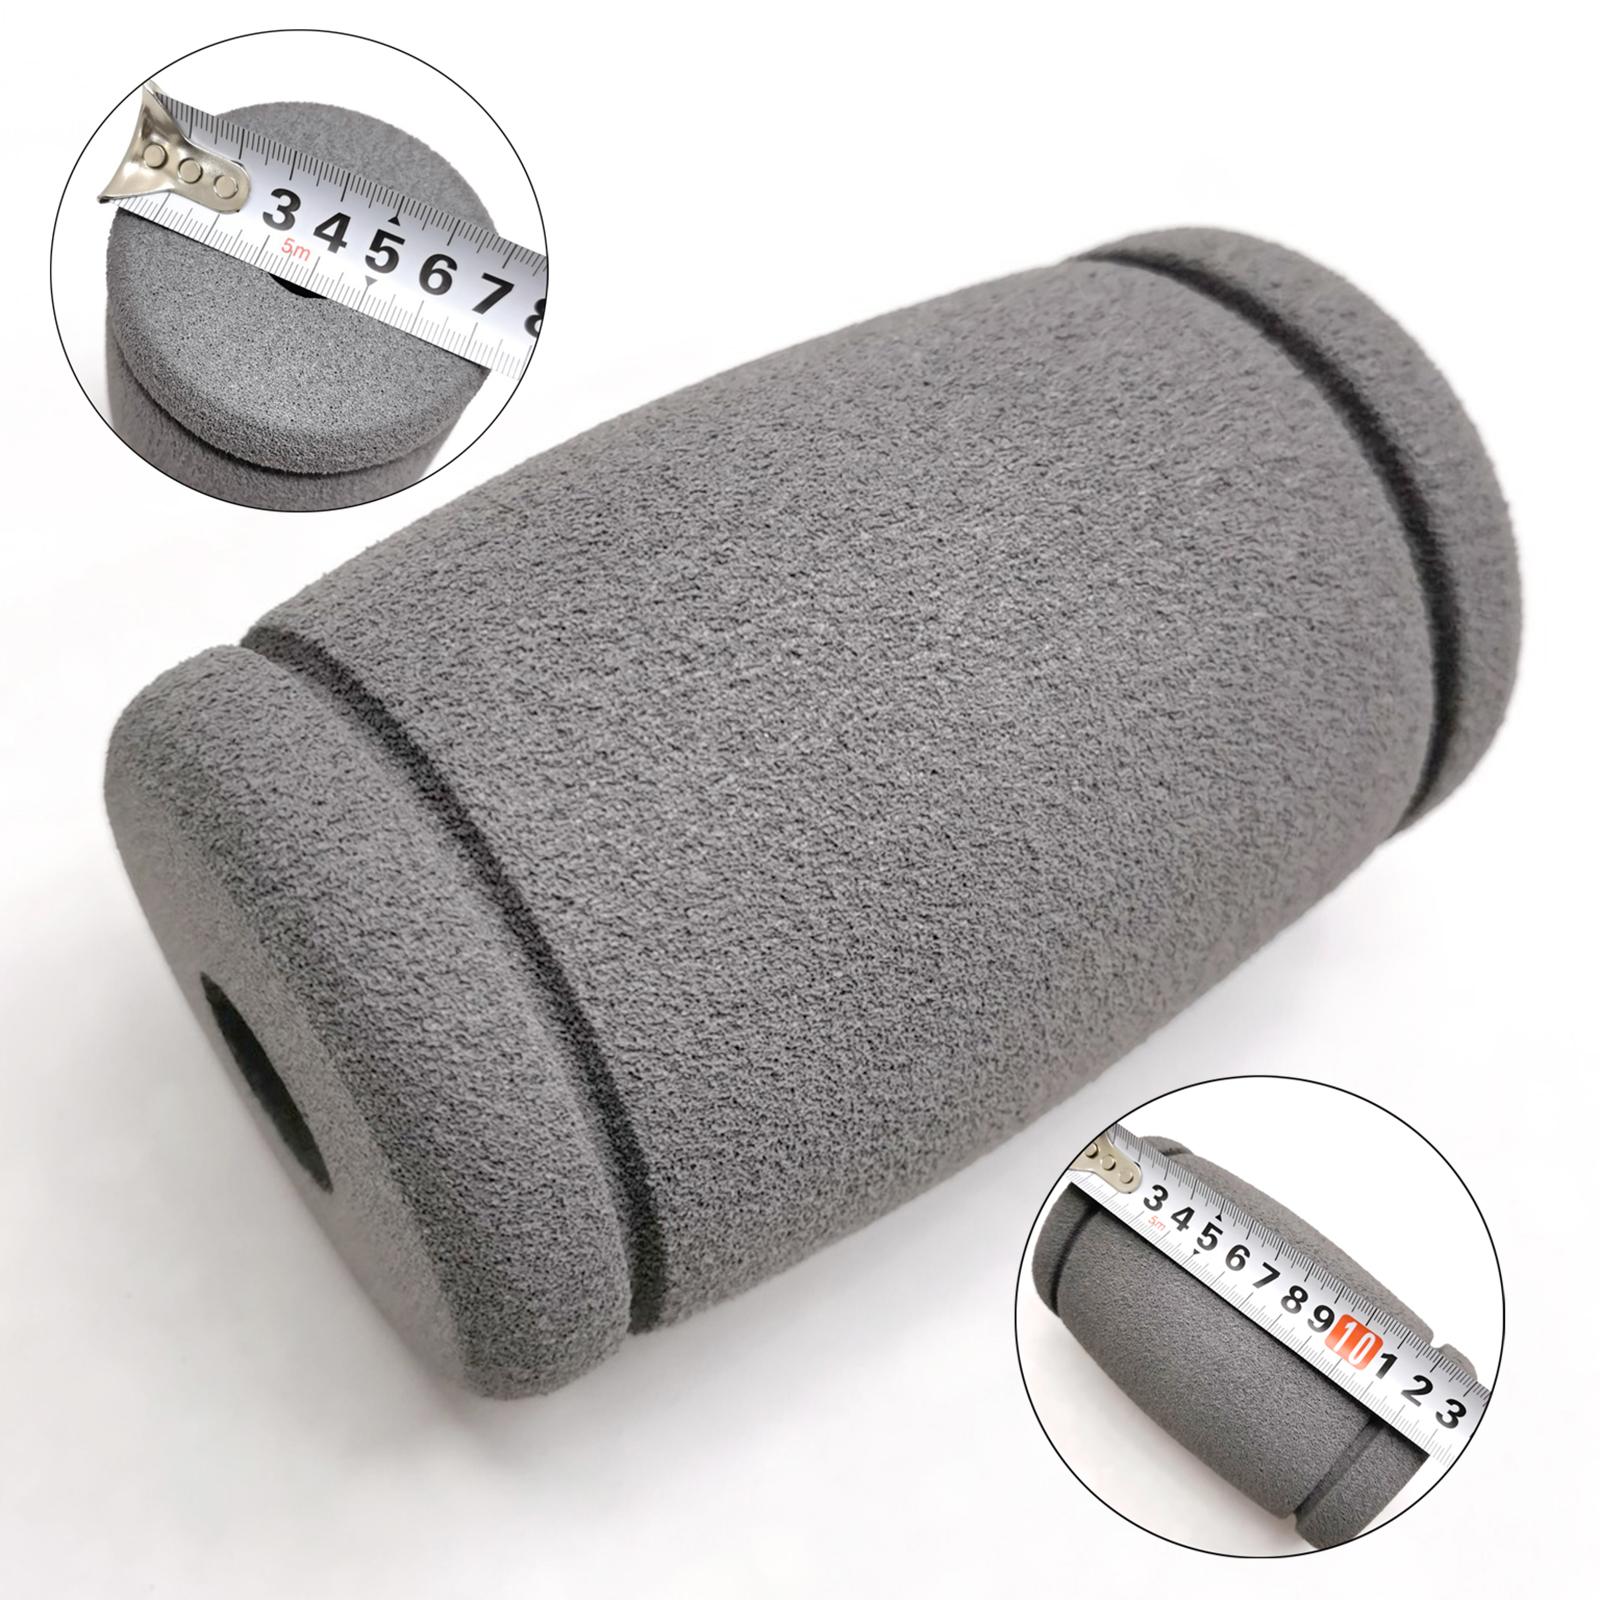 Foam Grips Fits 25mm Handle for Sit up Bar Machines muscular strength Training